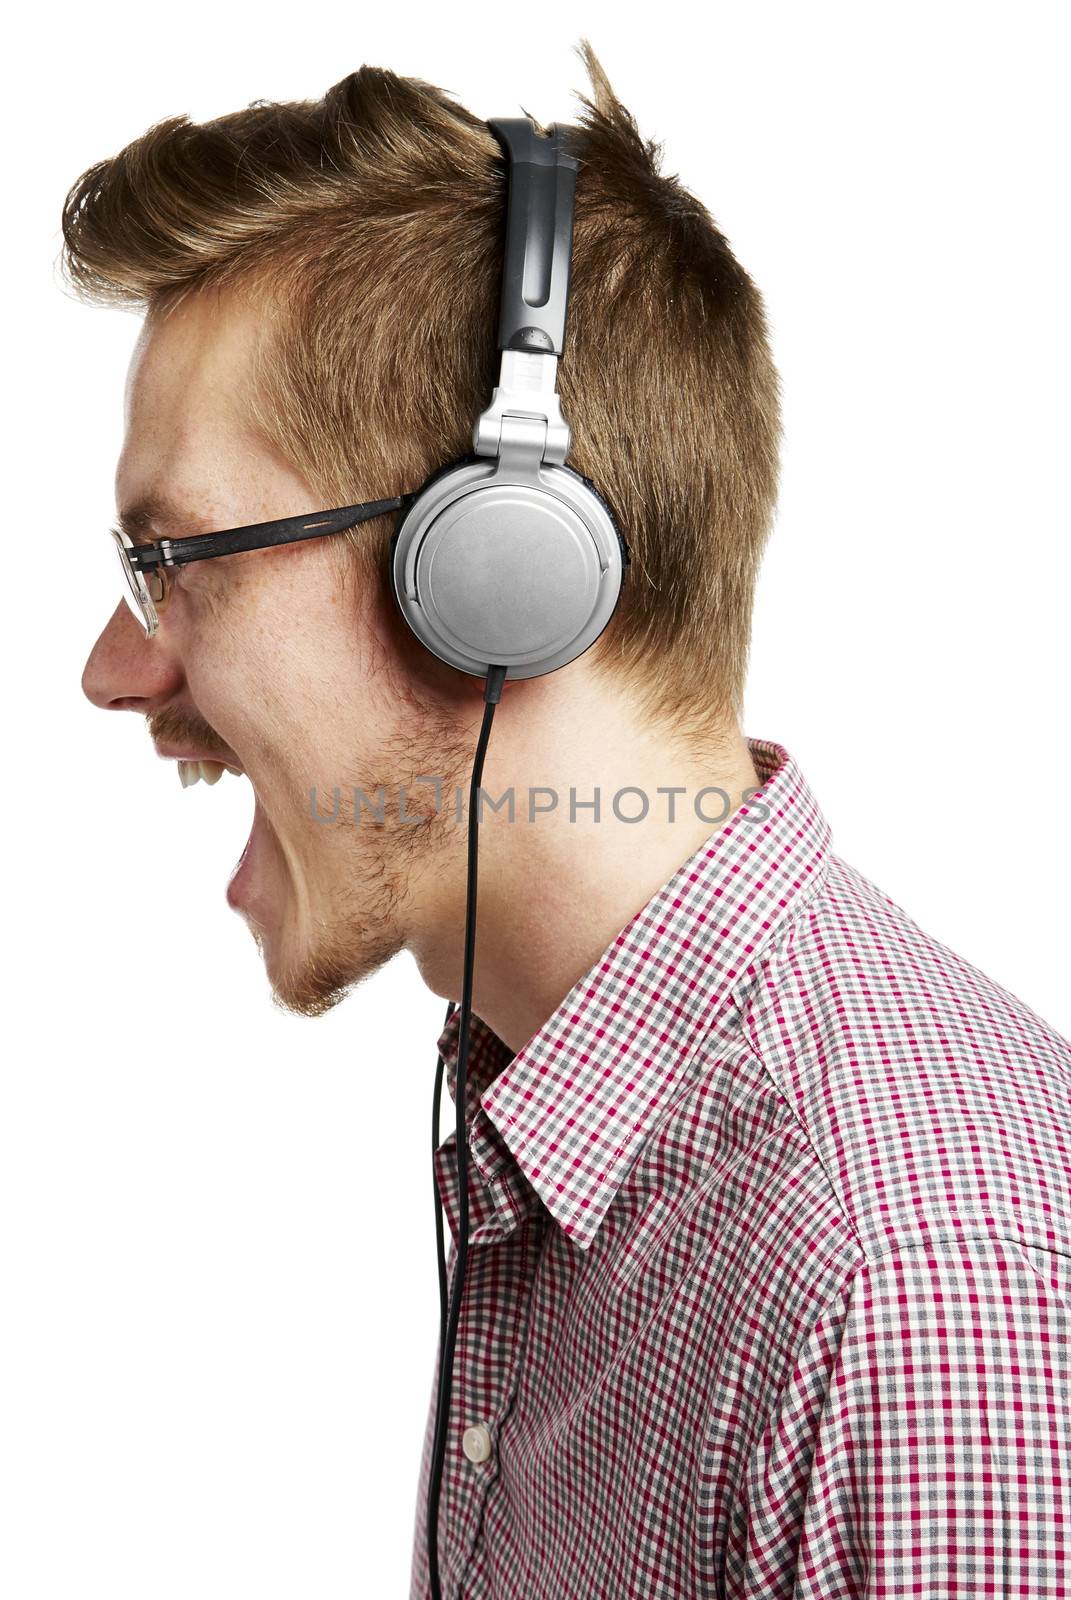 Young man listening to music and singing with headphones. Isolated on white. 